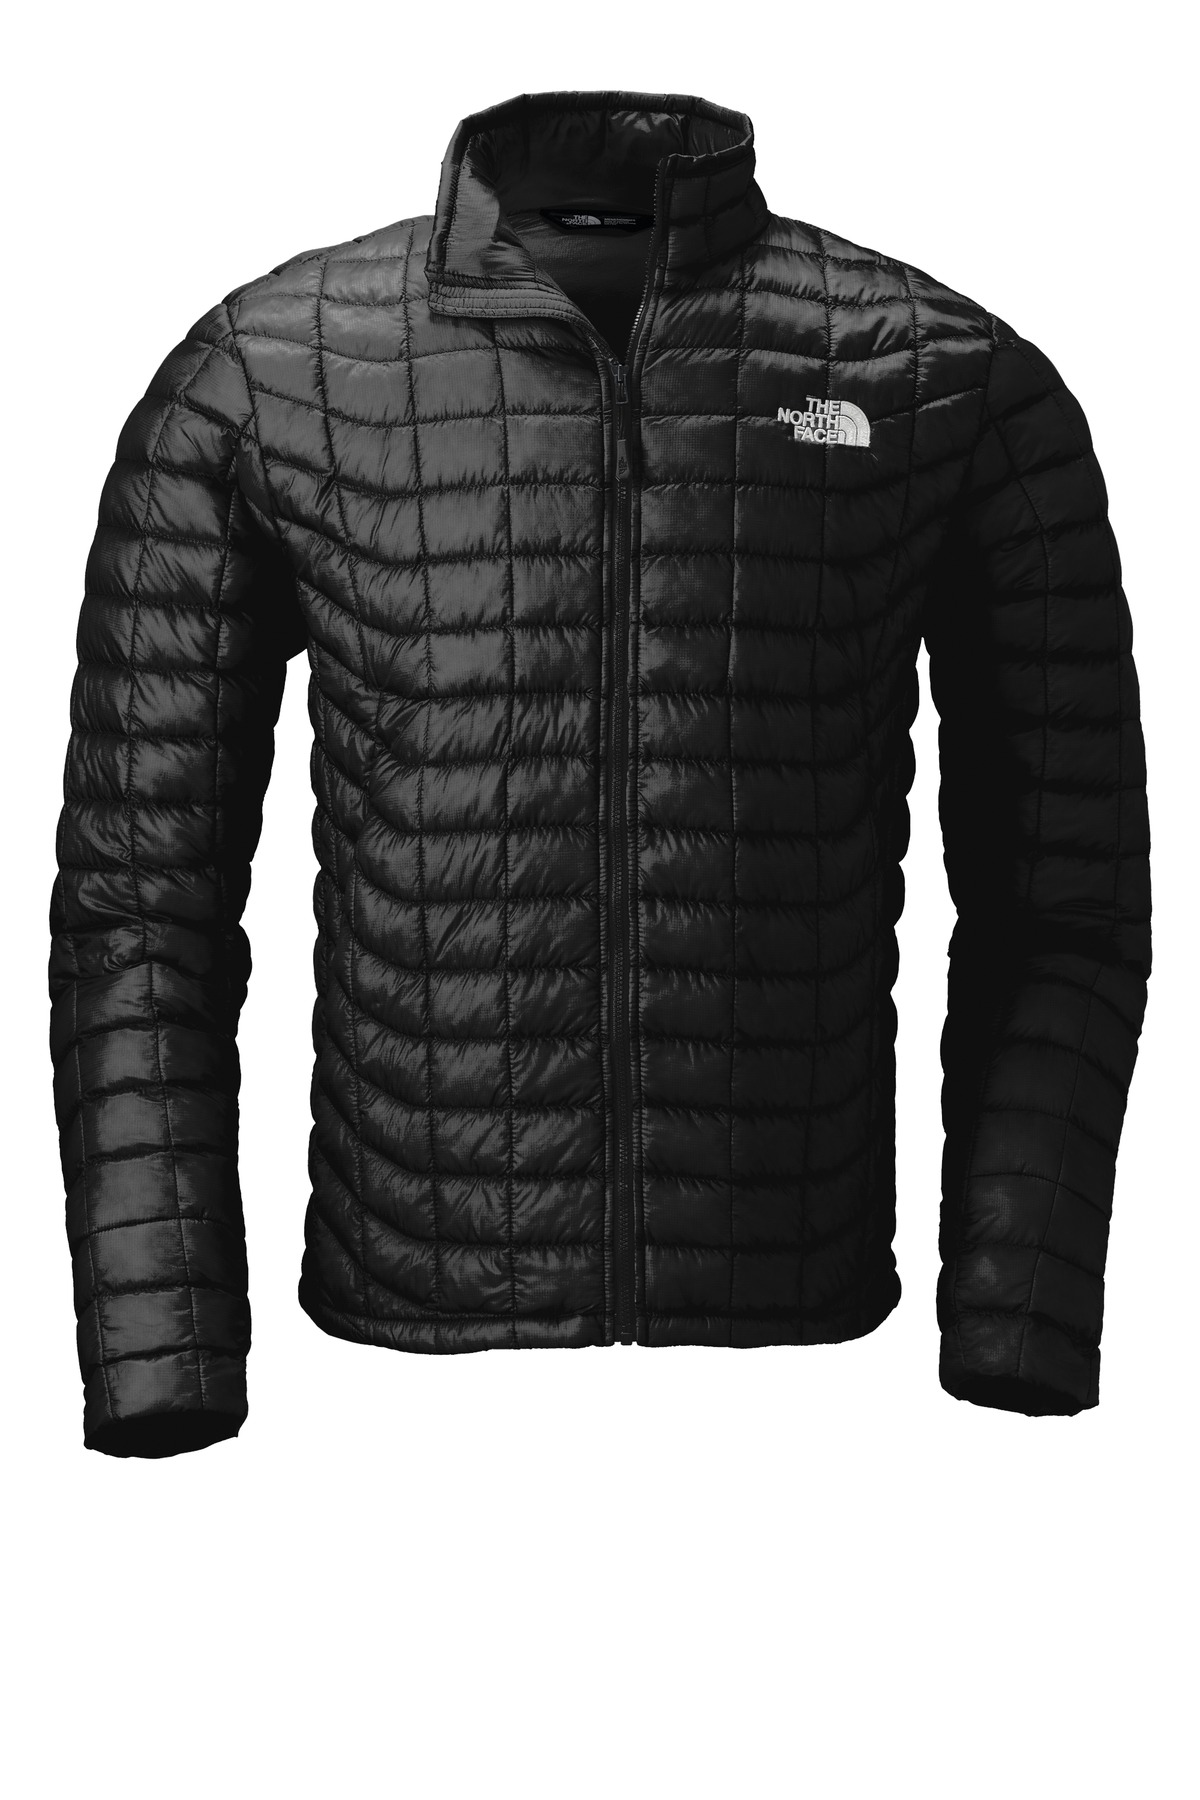 The North Face ® ThermoBall ™ Trekker Jacket. NF0A3LH2 - Custom Shirt Shop